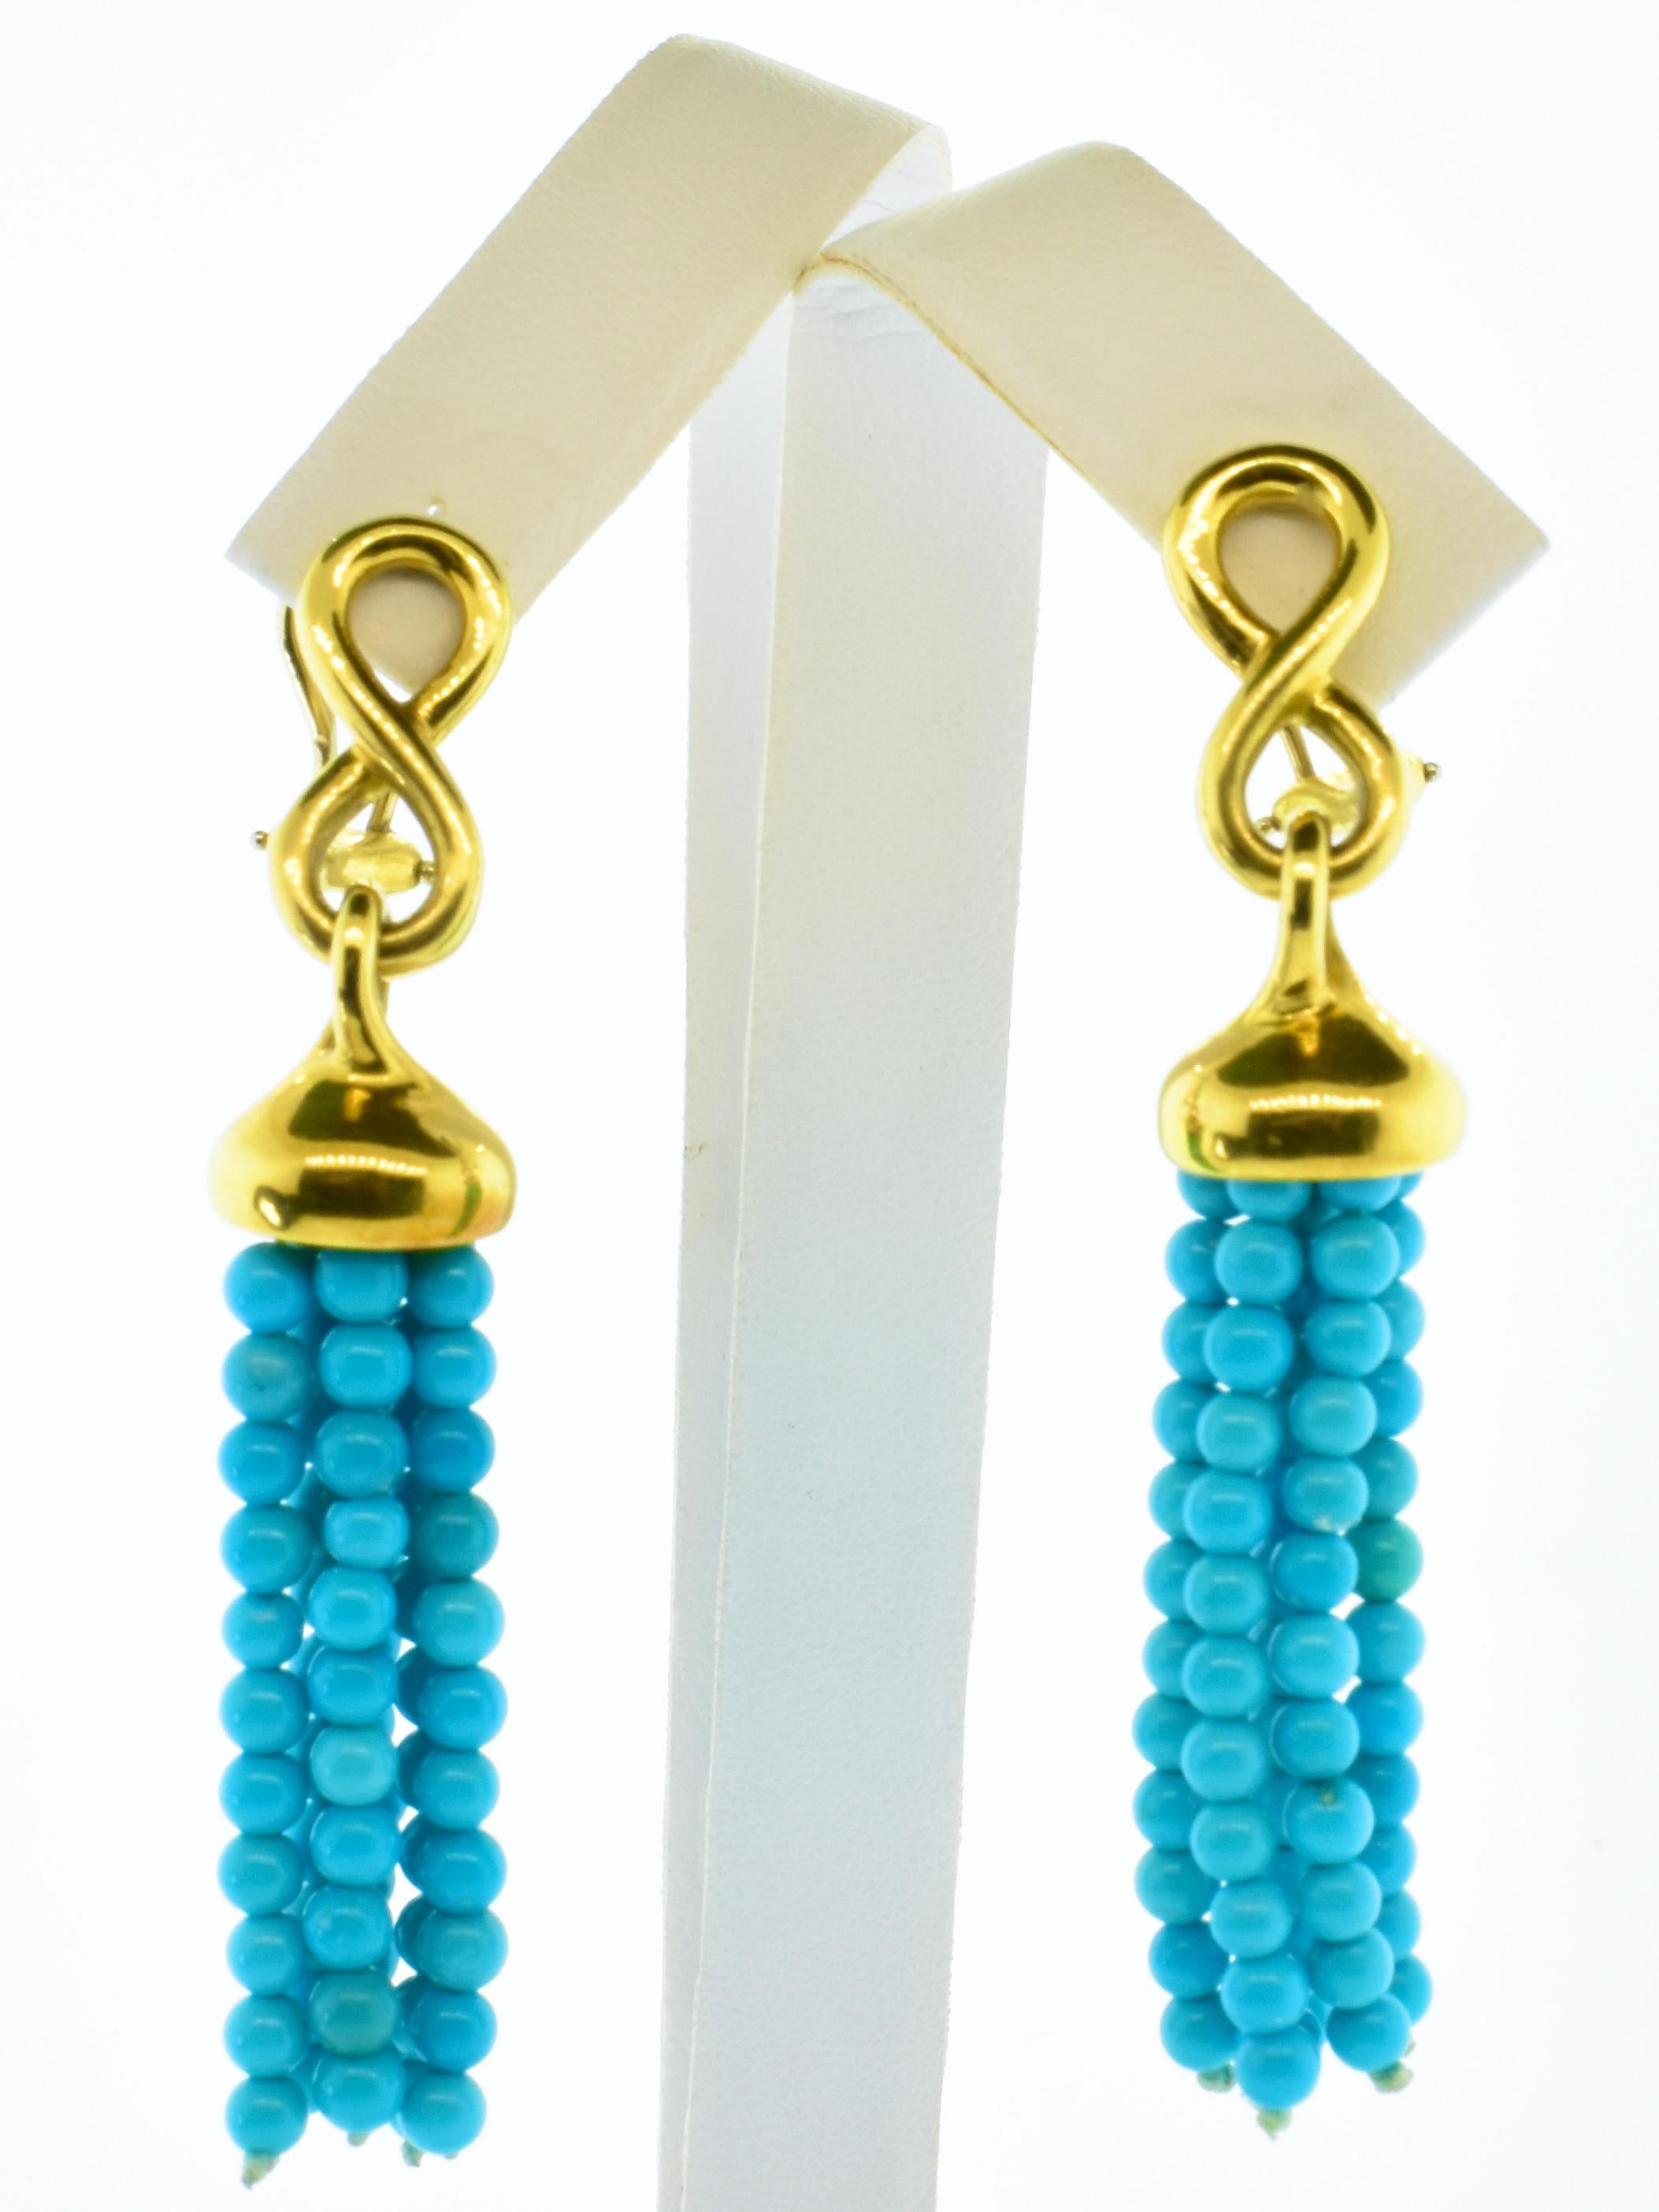 Angela Cummings 18K and natural turquoise tassel drop earrings. These earrings are by a top American designer, well. made with fine materials.  They are long and unusual and not a commercial grade piece of jewelry seen so prevalent today. 
 The tops